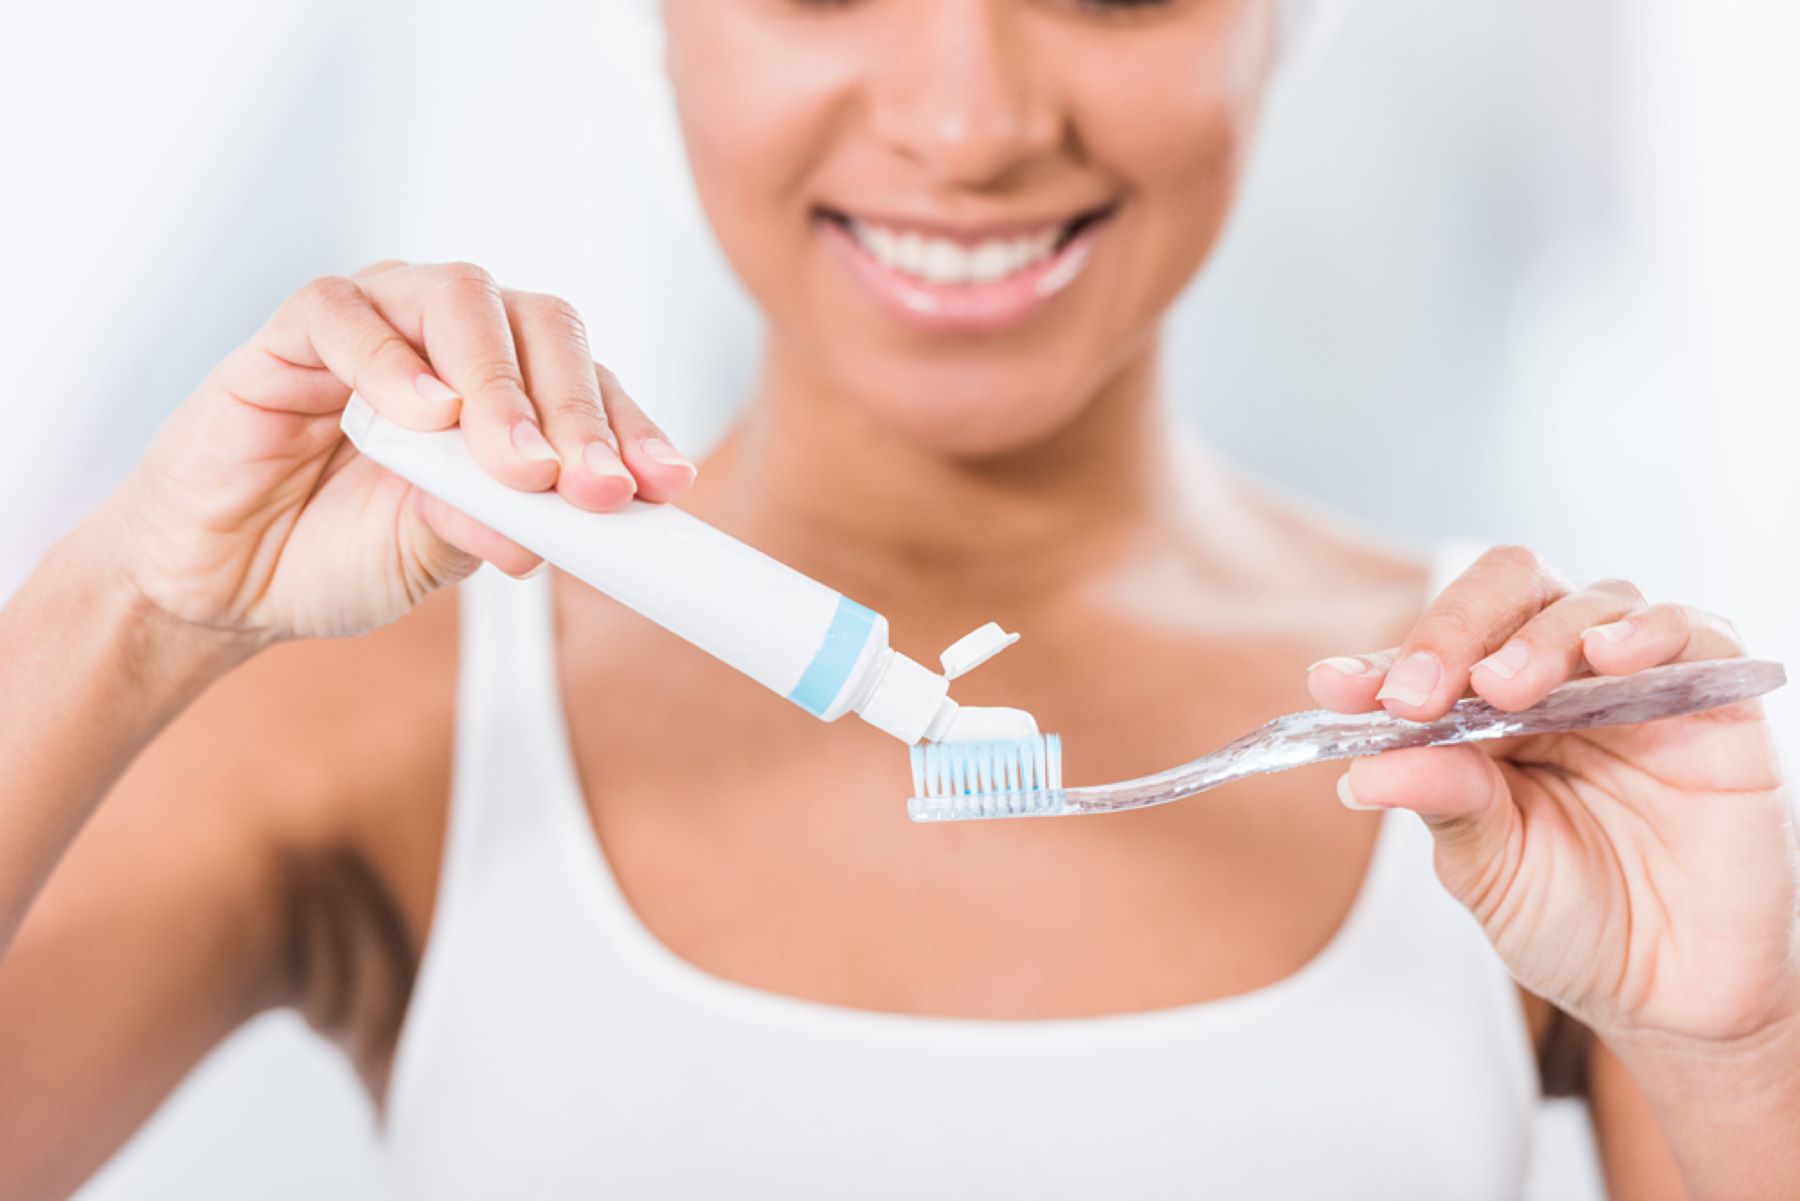 Dermatitis: Your Toothpaste May Cause Dermatitis Around Your Mouth